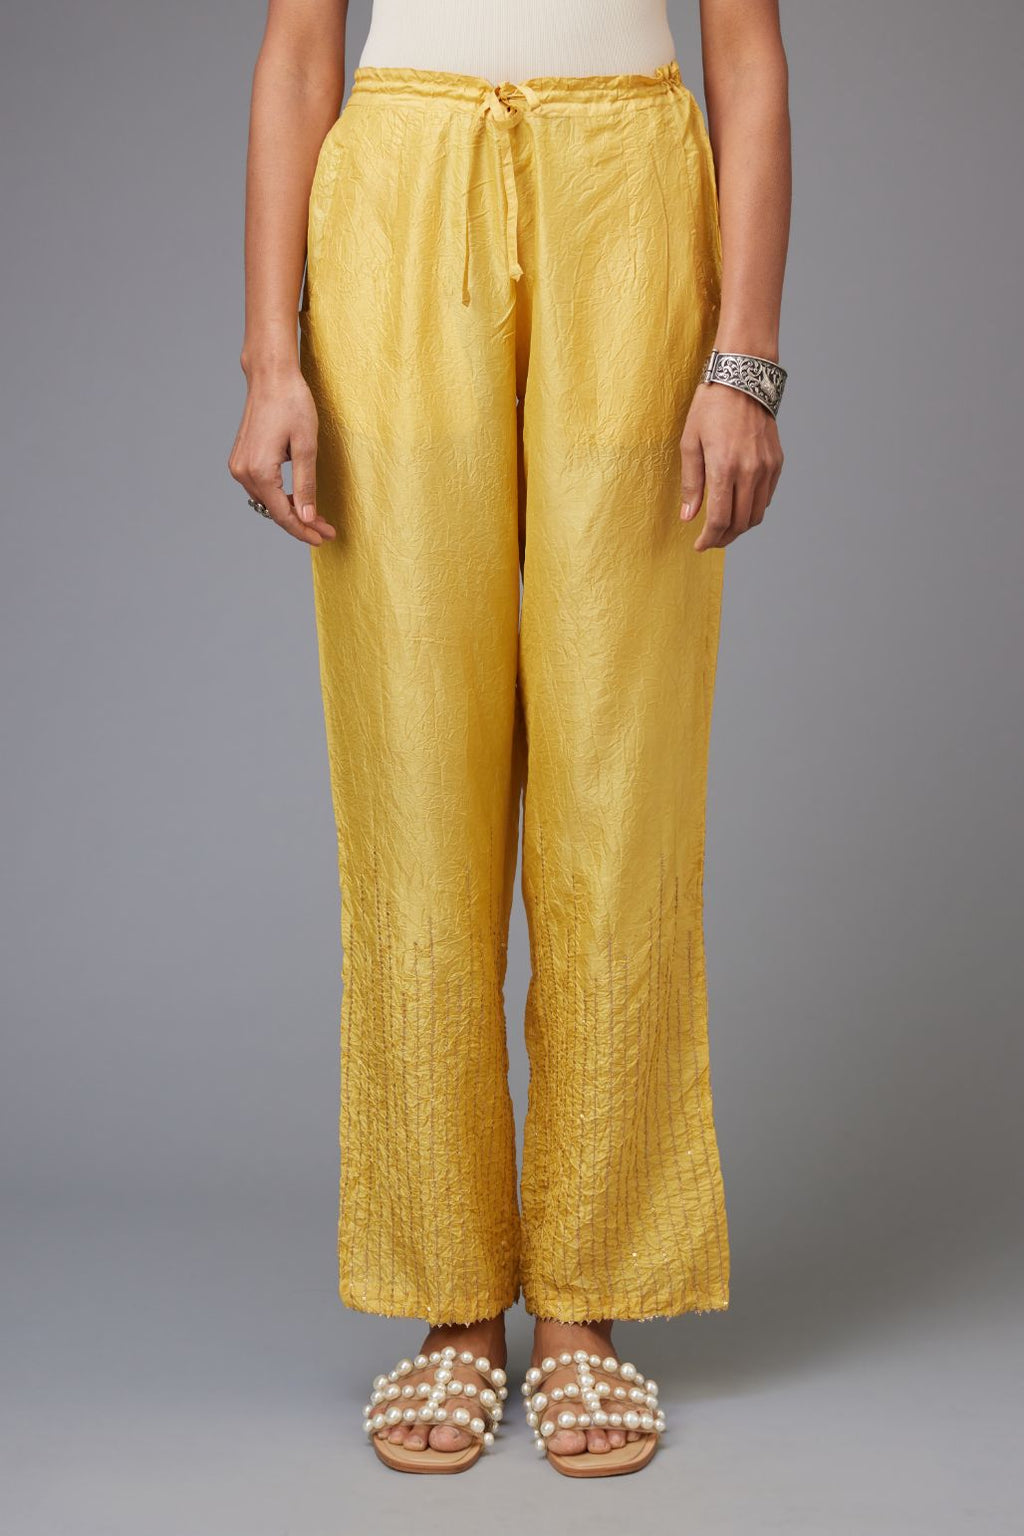 Buy online Yellow Cotton Straight Tapered Pant from Skirts tapered pants   Palazzos for Women by Vmart for 339 at 29 off  2023 Limeroadcom